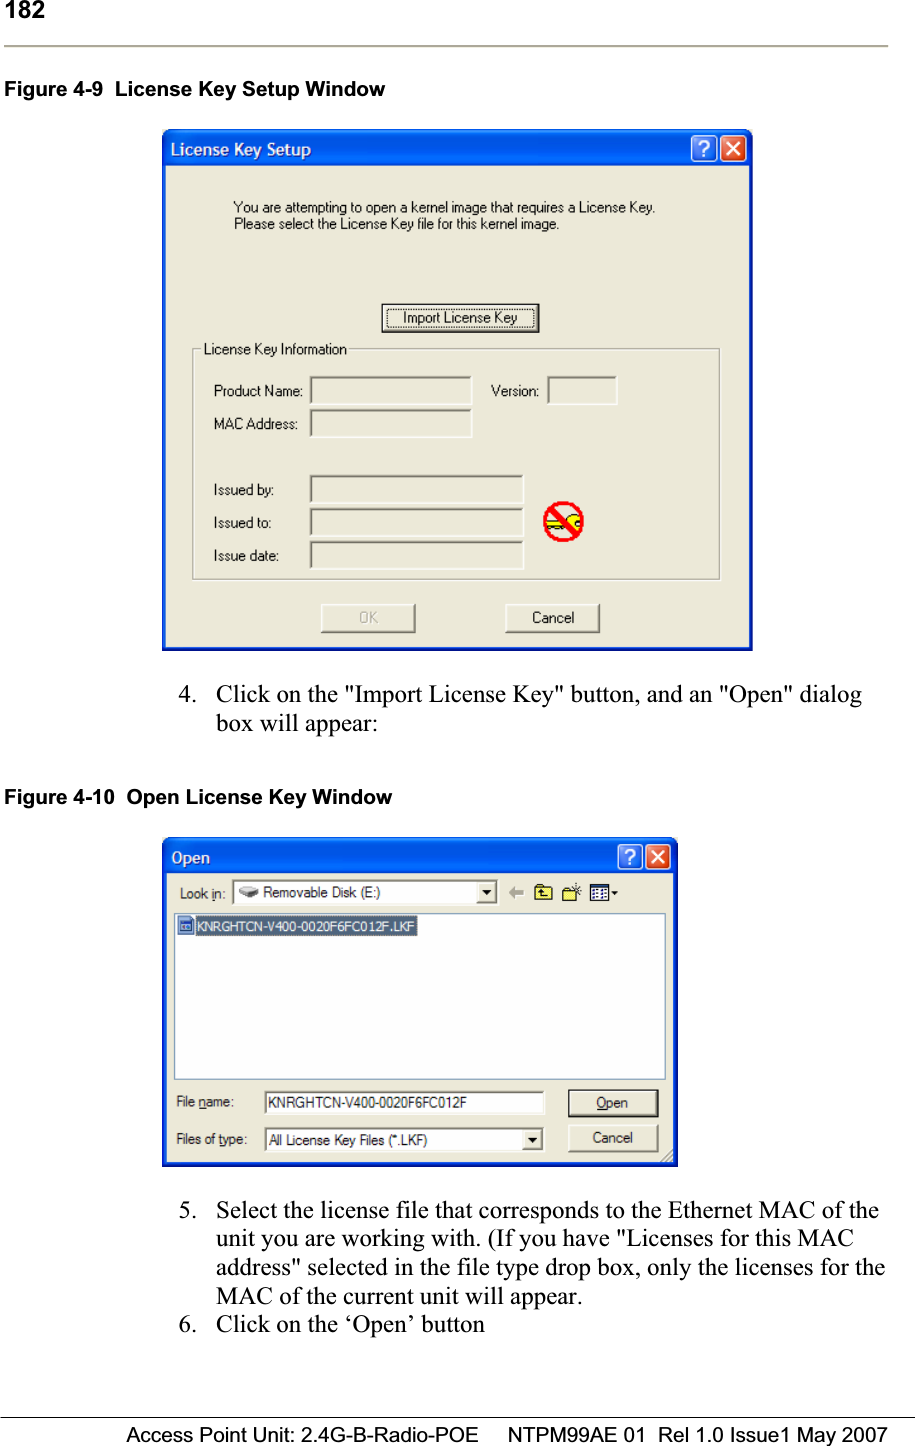 182 Access Point Unit: 2.4G-B-Radio-POE     NTPM99AE 01  Rel 1.0 Issue1 May 2007Figure 4-9  License Key Setup Window 4. Click on the &quot;Import License Key&quot; button, and an &quot;Open&quot; dialog box will appear: Figure 4-10  Open License Key Window 5. Select the license file that corresponds to the Ethernet MAC of the unit you are working with. (If you have &quot;Licenses for this MAC address&quot; selected in the file type drop box, only the licenses for the MAC of the current unit will appear. 6. Click on the ‘Open’ button 